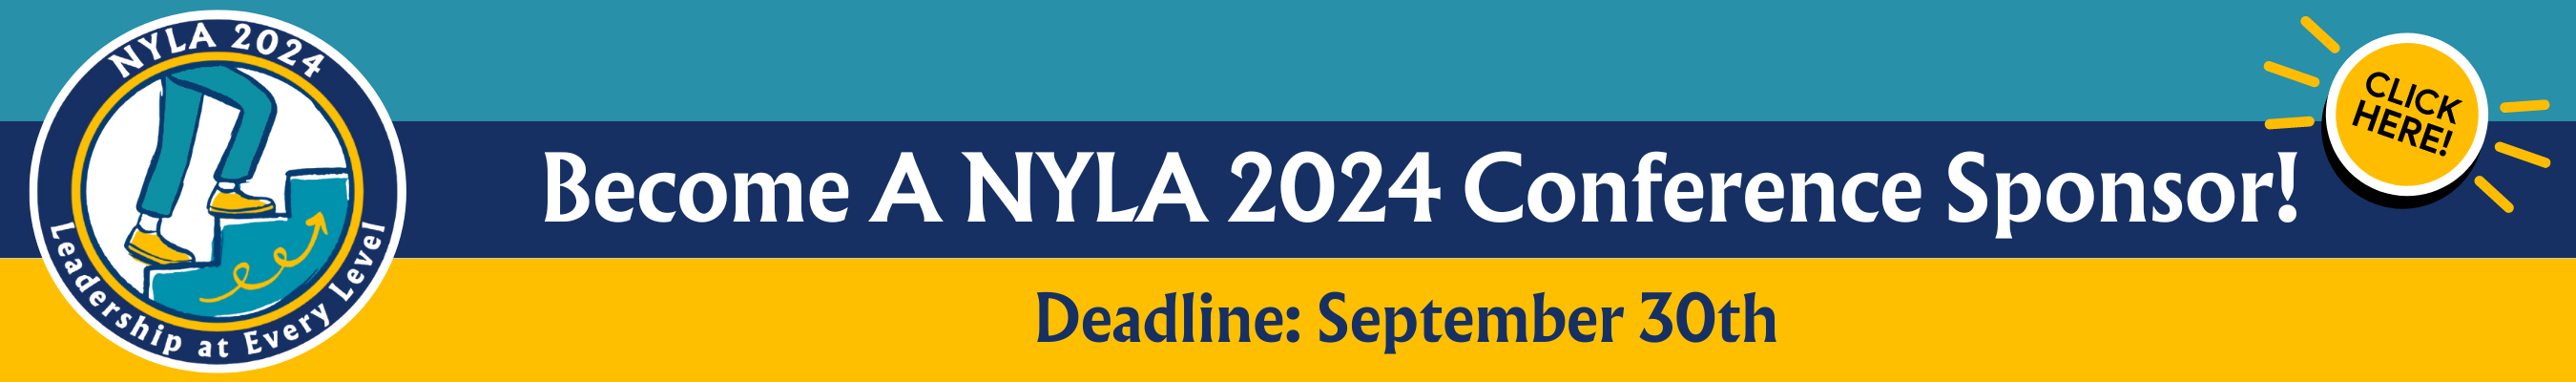 NYLA 2024 Conference Sponsorships - Deadline September 30th - Click to Learn More